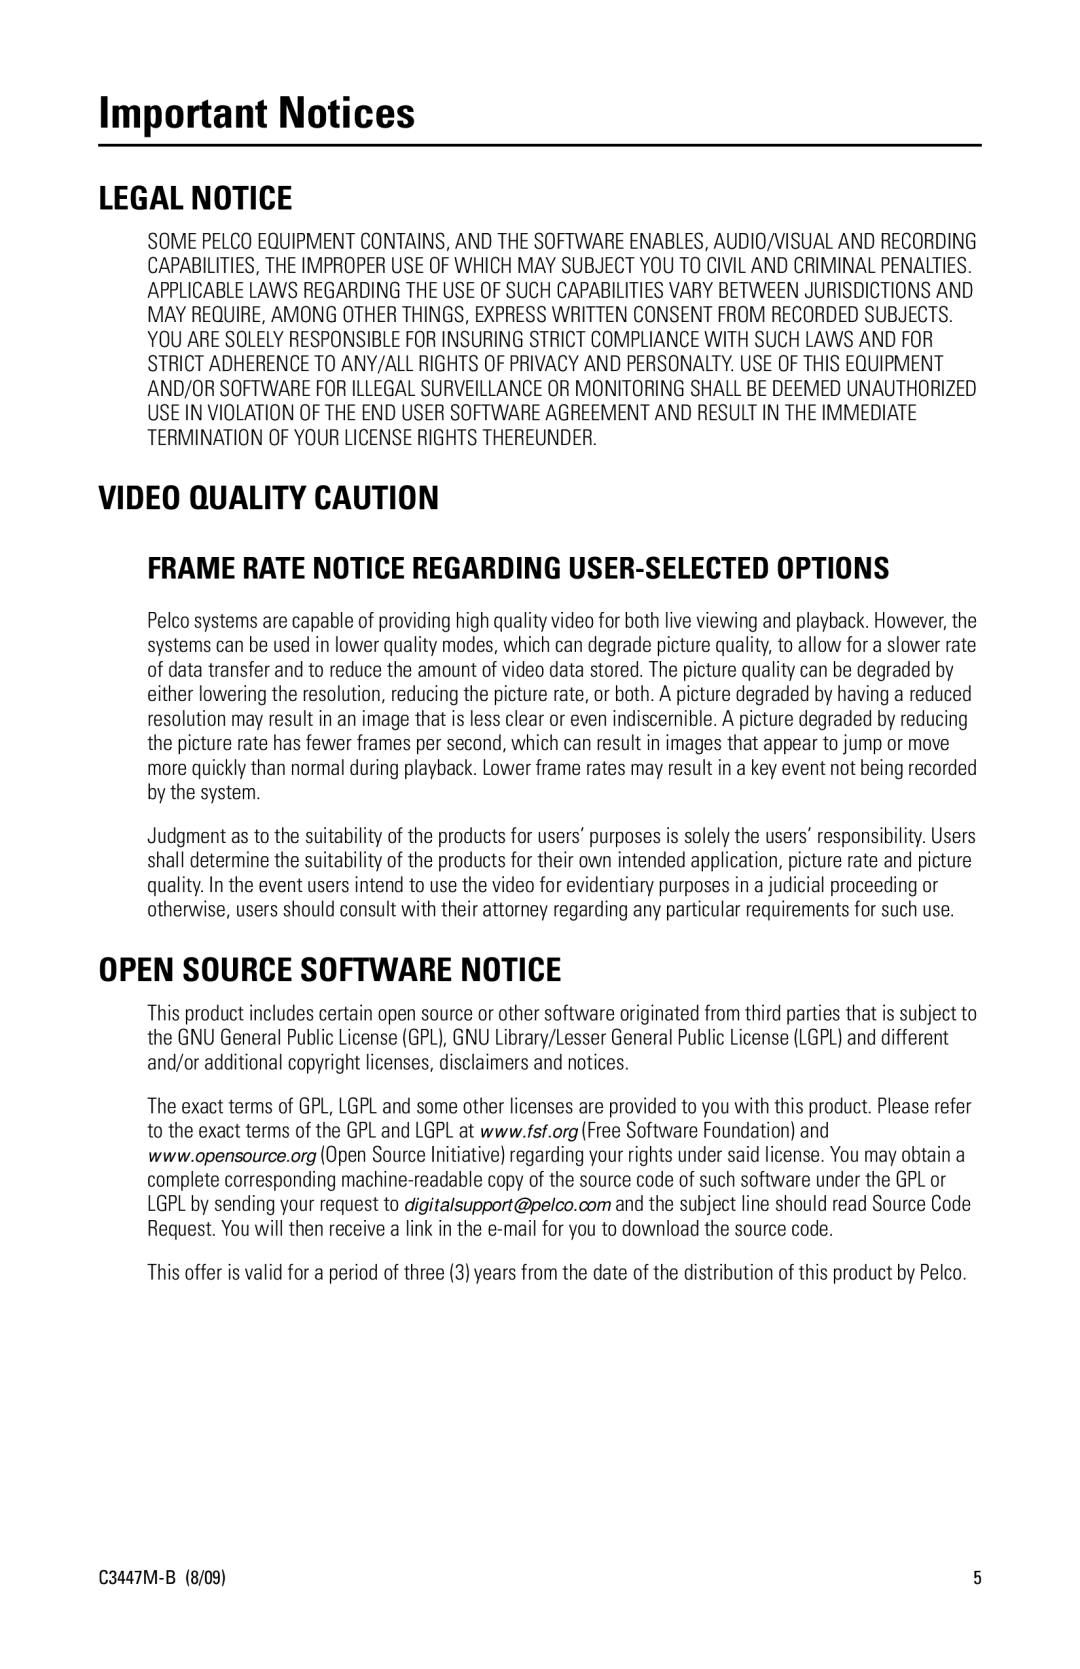 Pelco C3447M-B (8/09) manual Important Notices, Legal Notice, Video Quality Caution, Open Source Software Notice 